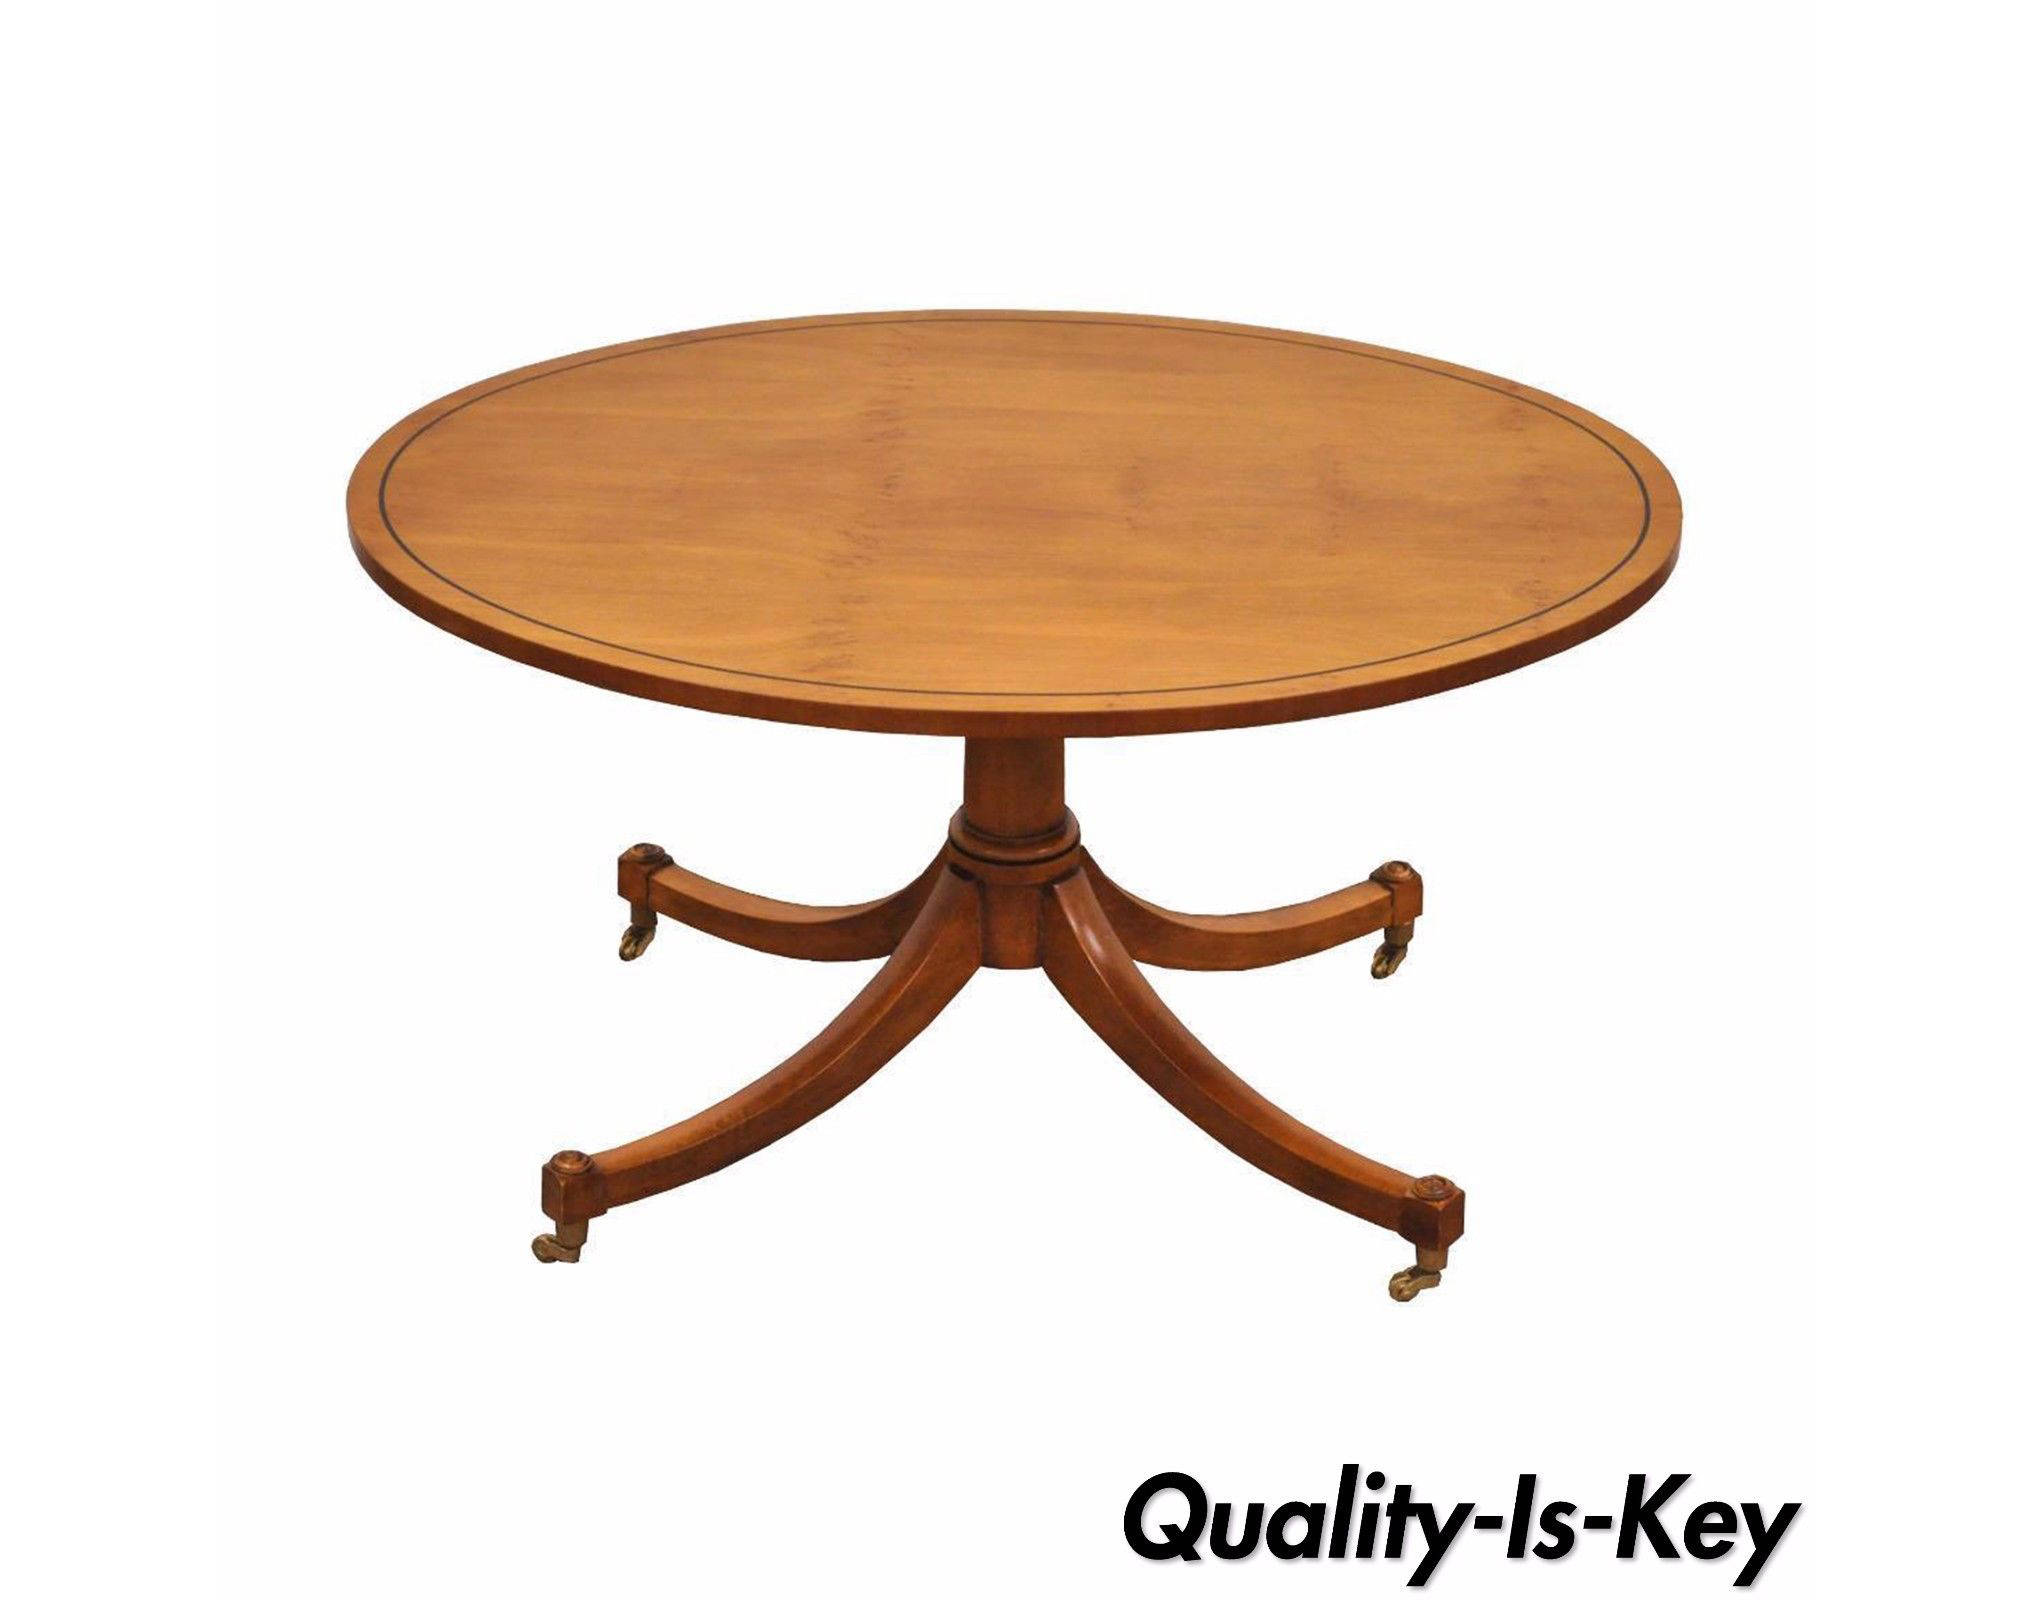 oval maple coffee table bohemian tags awesome airplane glass vintage duncan phyfe baker furniture accent end tables patio storage bench small drink dark wood kitchen side lamp